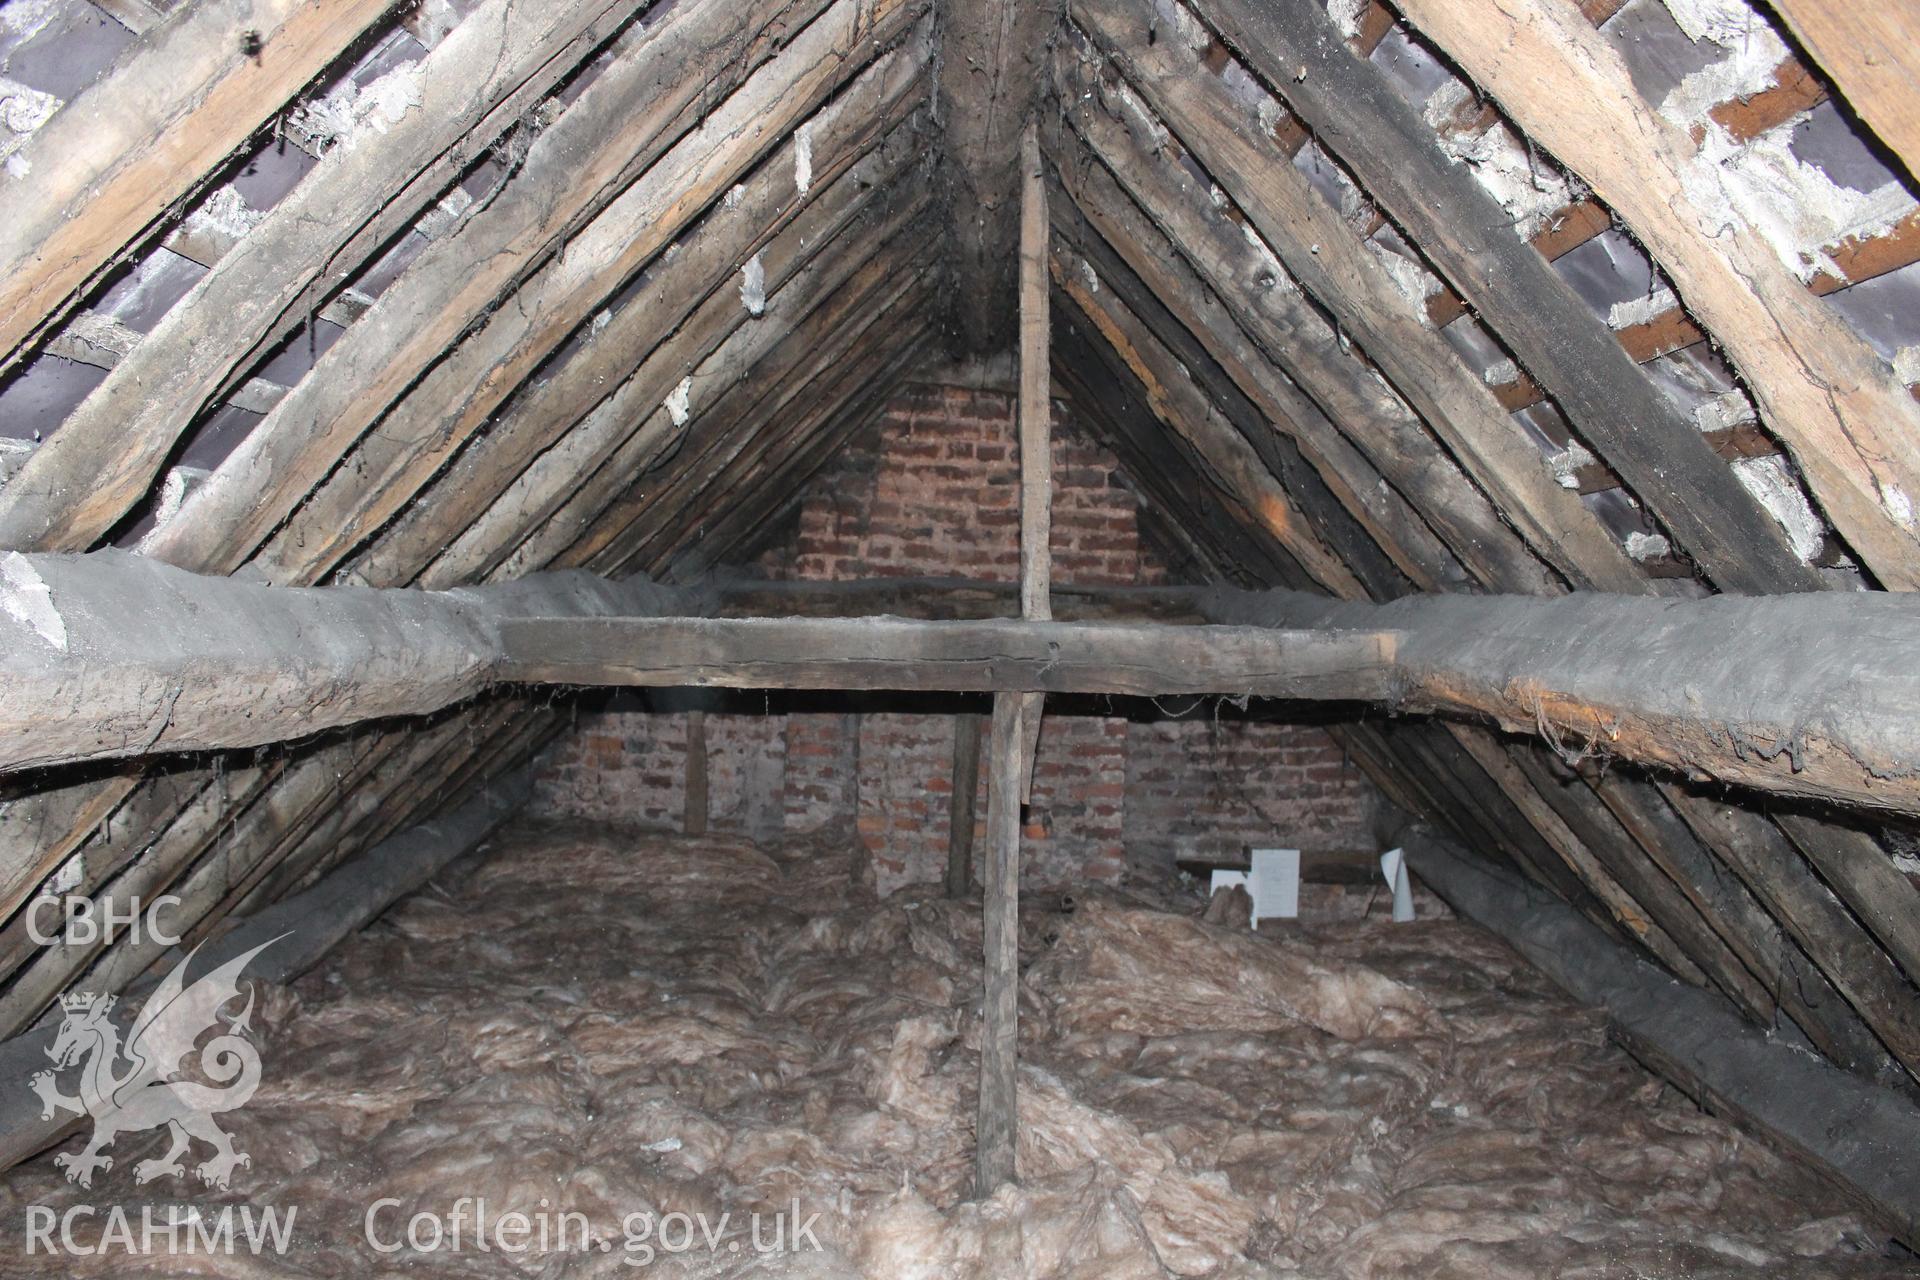 Colour photograph showing detail of timber frame and interior of roof with red brick wall behind, in attic at 5 to 7 Mwrog Street, Ruthin. Photographed during survey conducted by Geoff Ward on 30th May 2014.